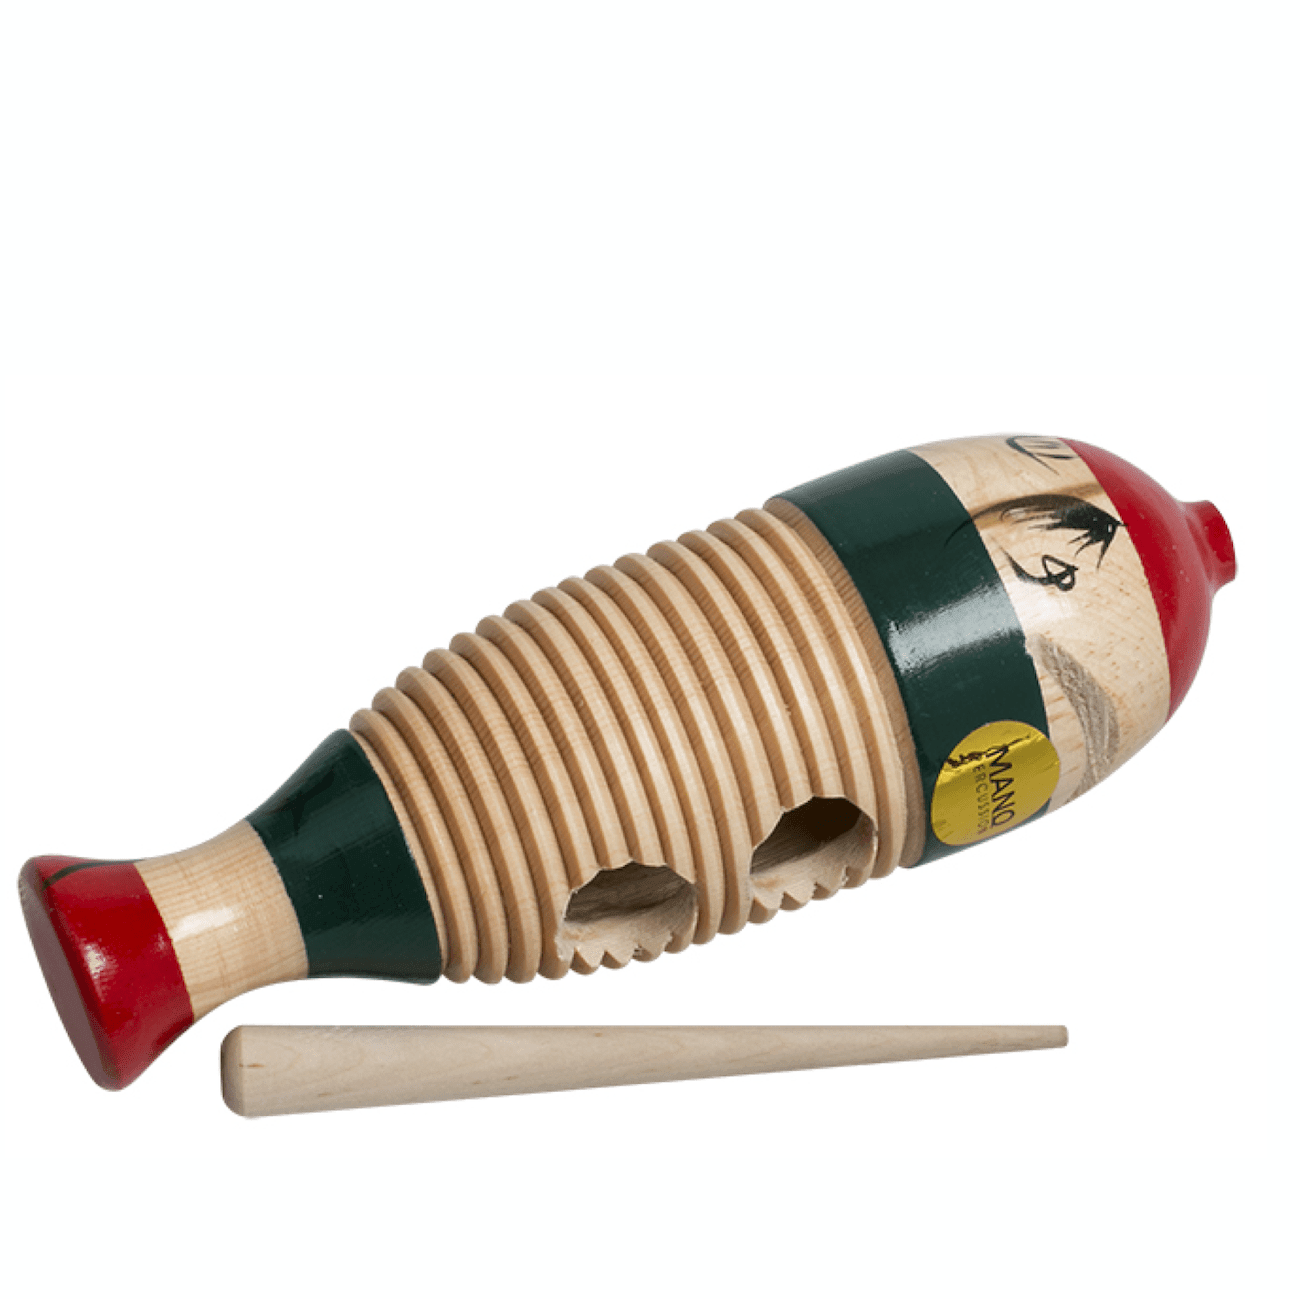 Mano - 8 Inch Mini Guiro Wooden Fish Shaped Red/Nat/Grn - Drums & Percussion - Percussion by Mano Percussion at Muso's Stuff